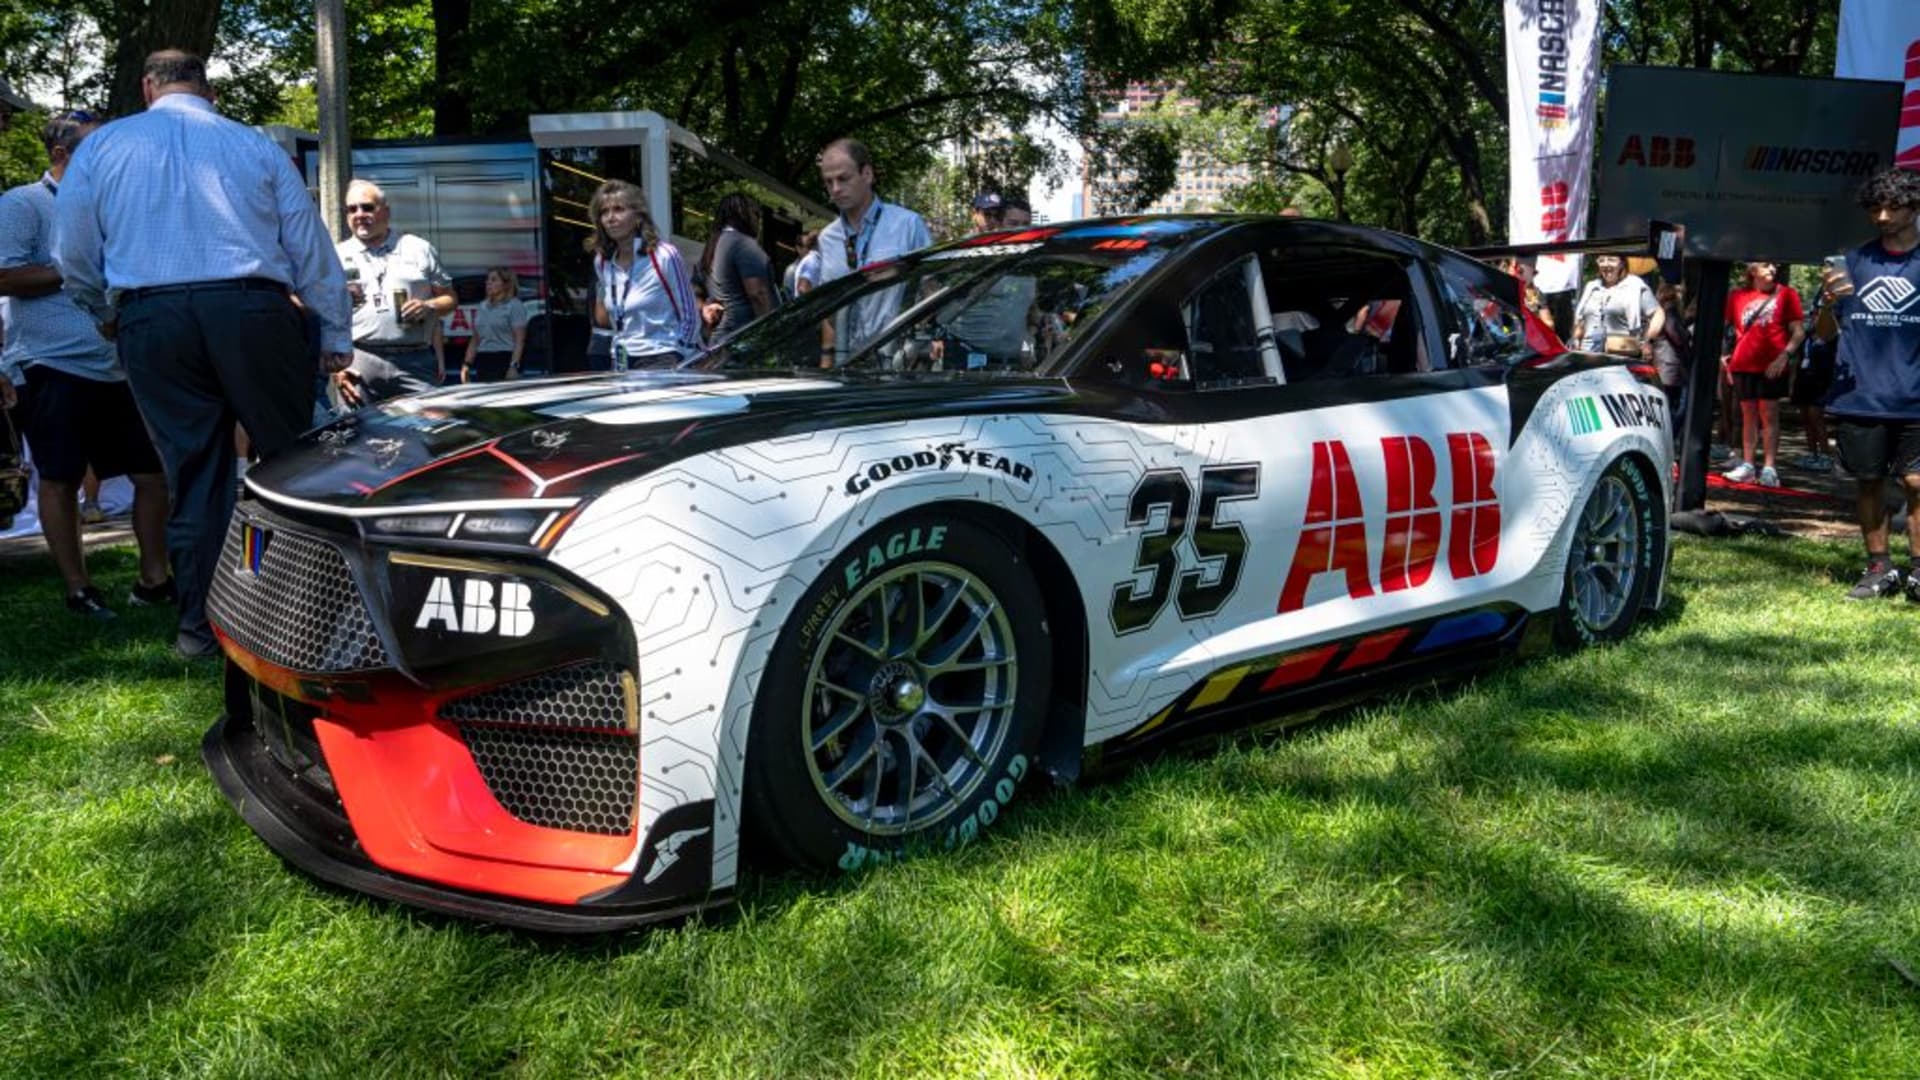 NASCAR Debuts Electric Race Car Prototype Ahead of Chicago Street Race